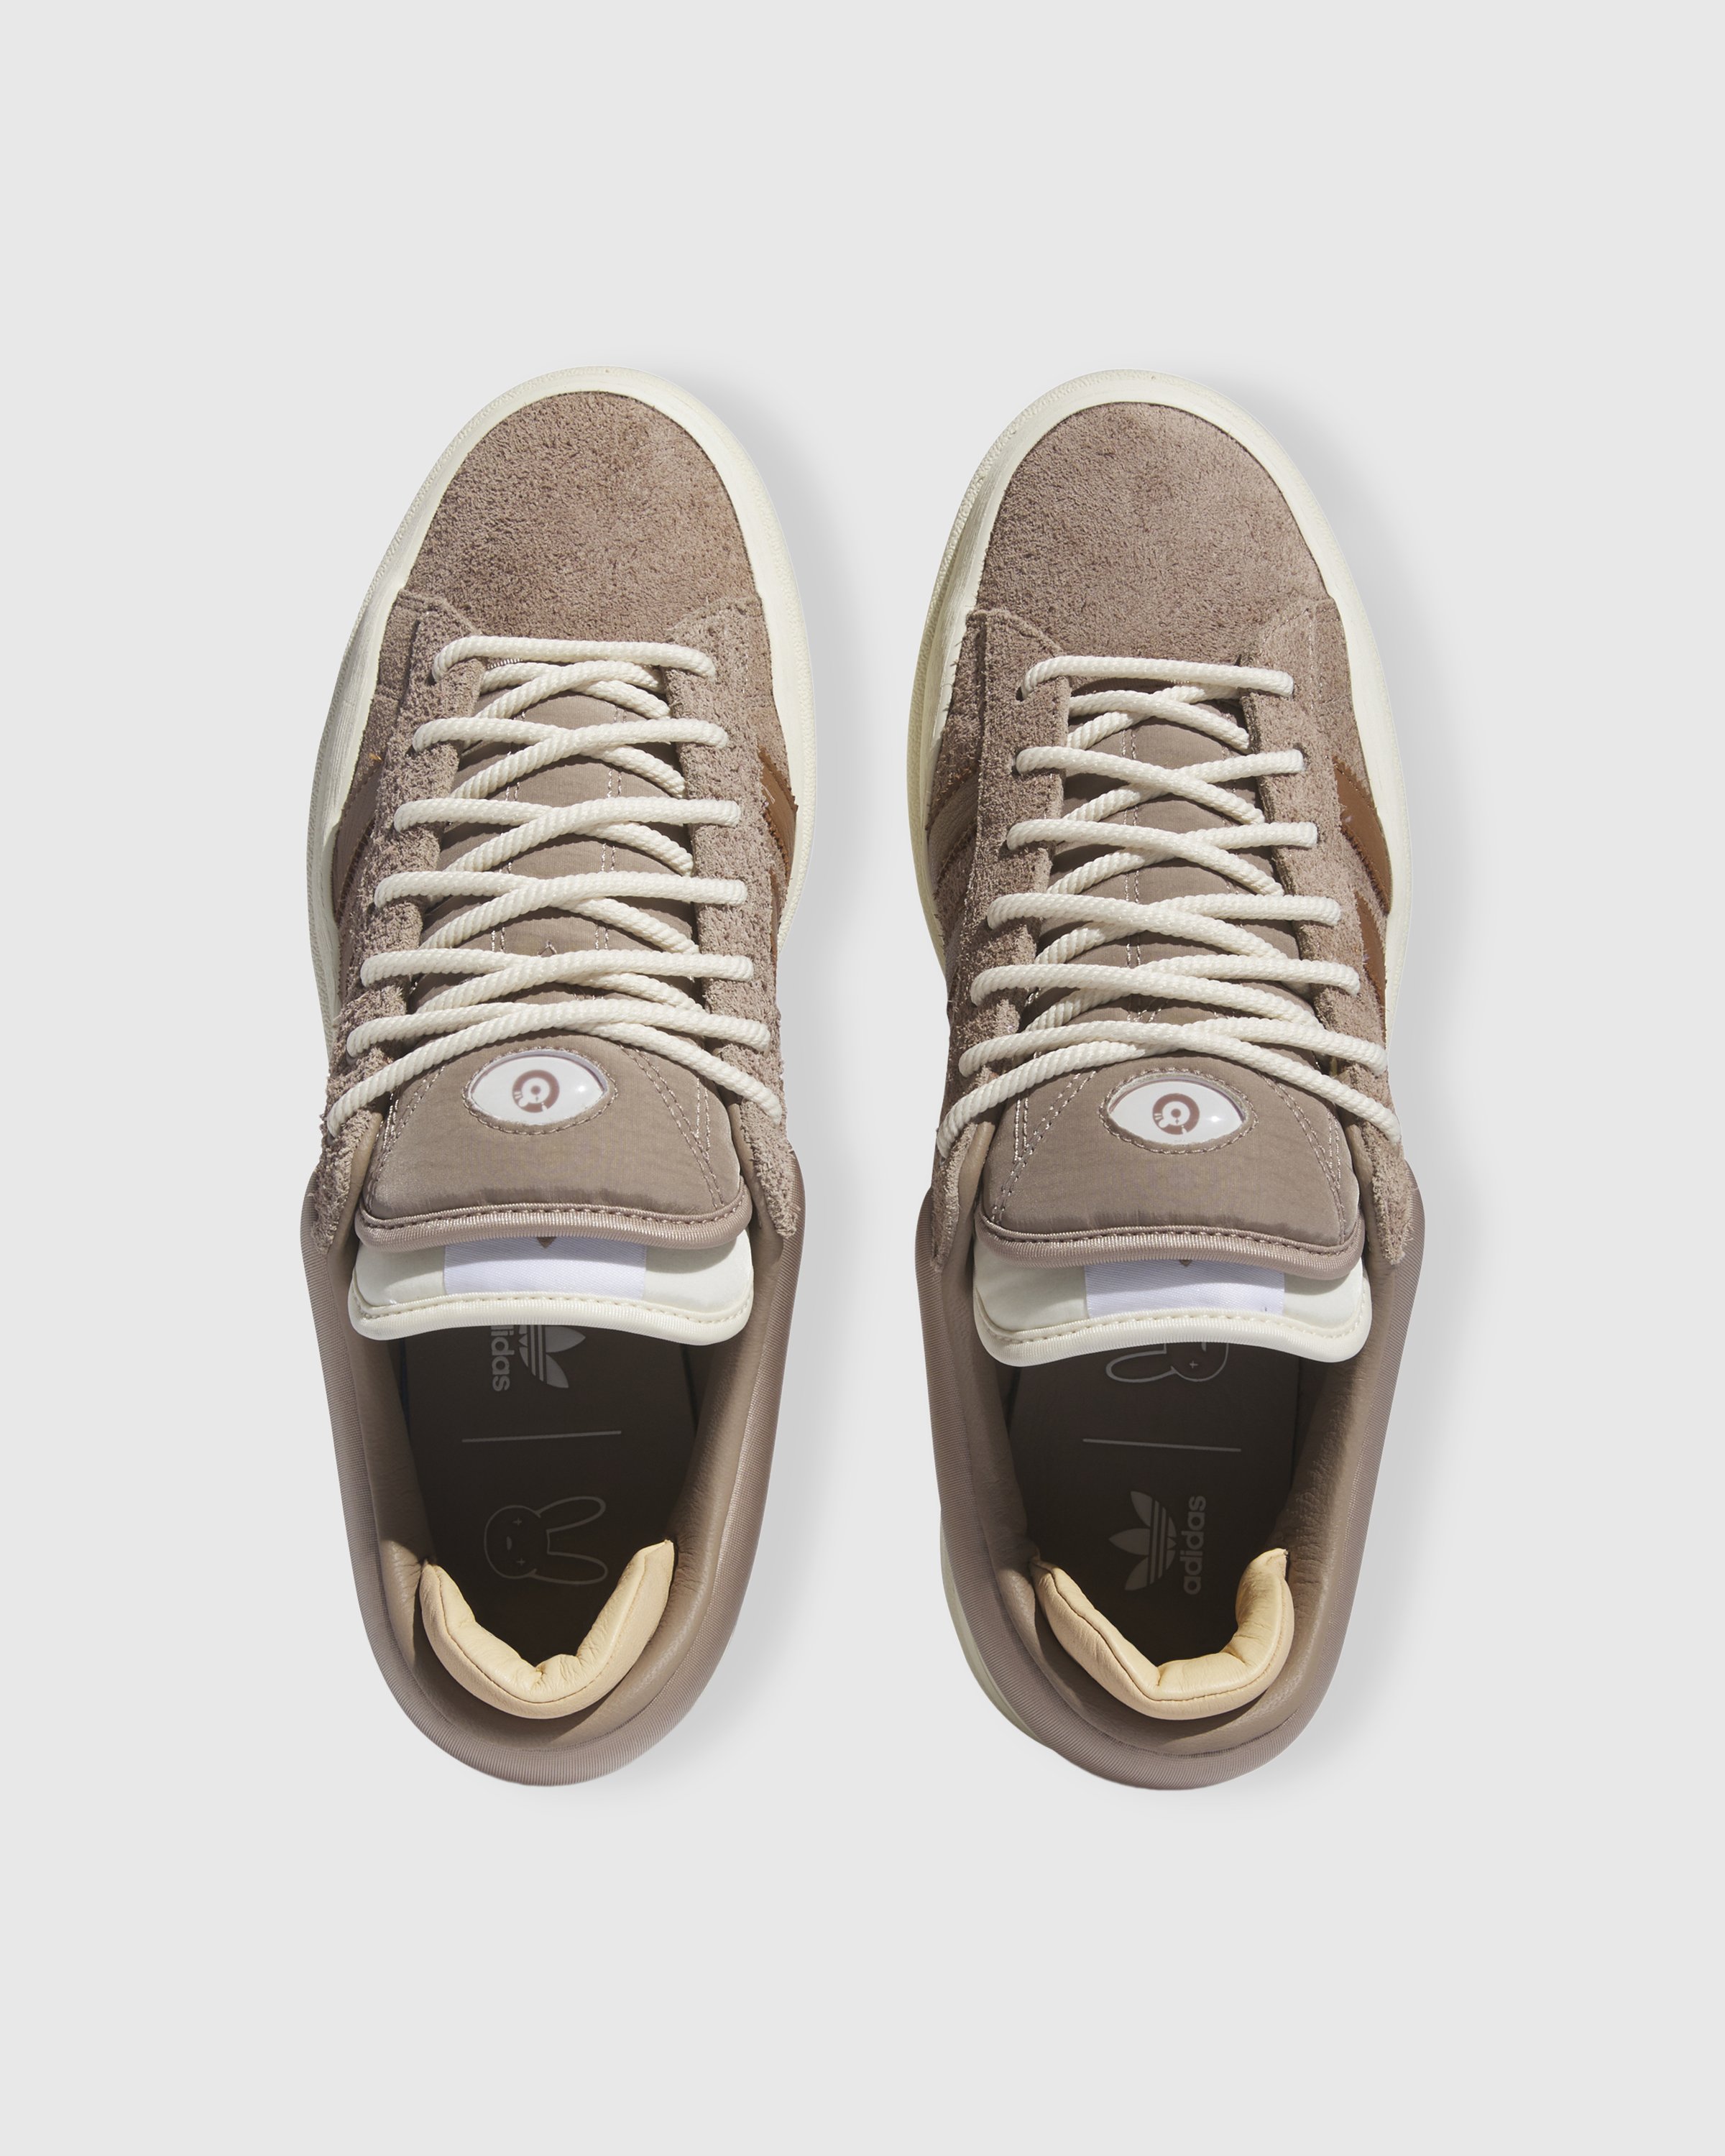 Adidas x Bad Bunny - Campus Chalky Brown - Footwear - White - Image 4